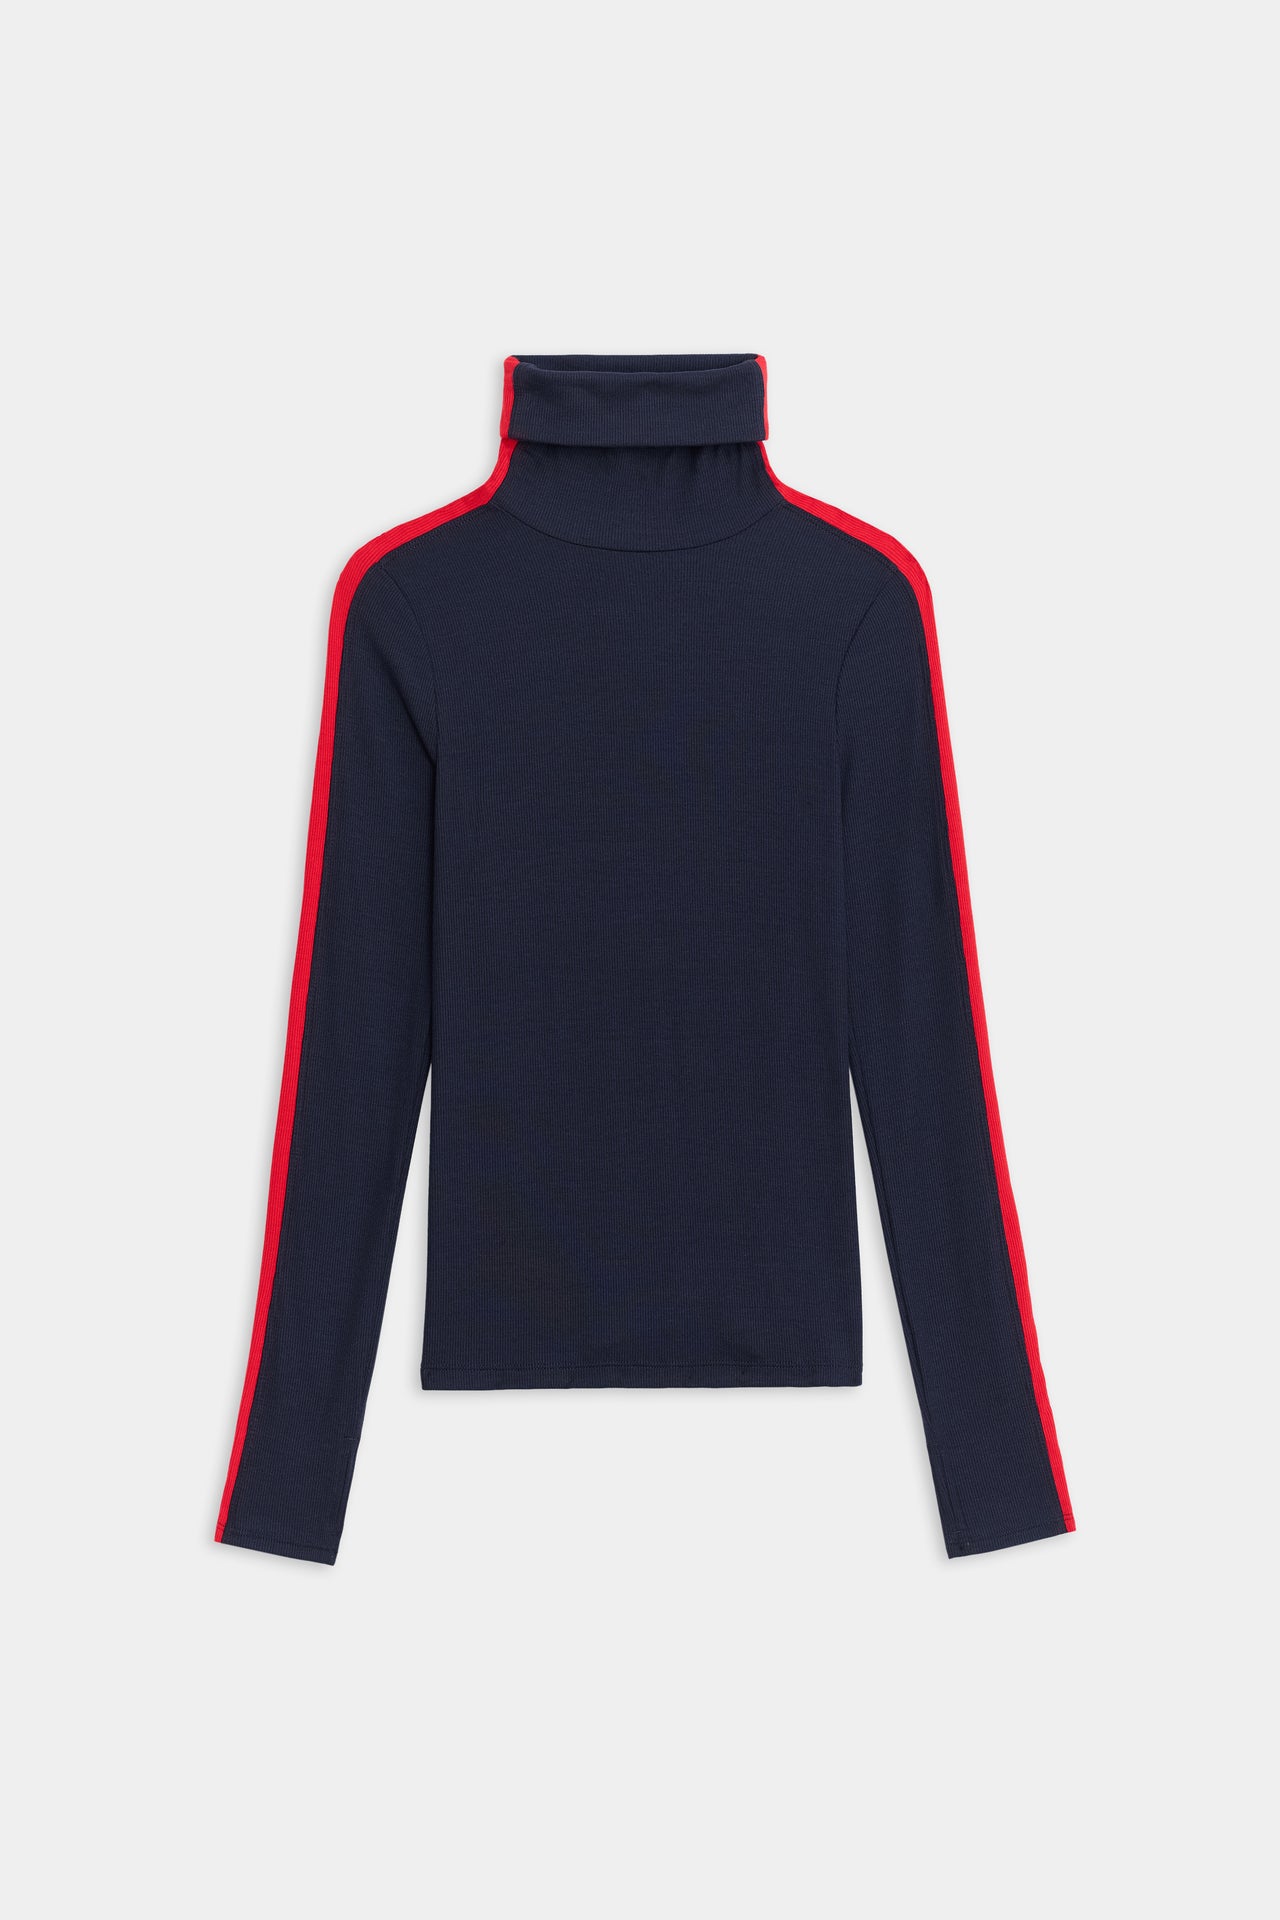 A Jackson Rib Full Length Turtleneck with red and blue stripes by SPLITS59.